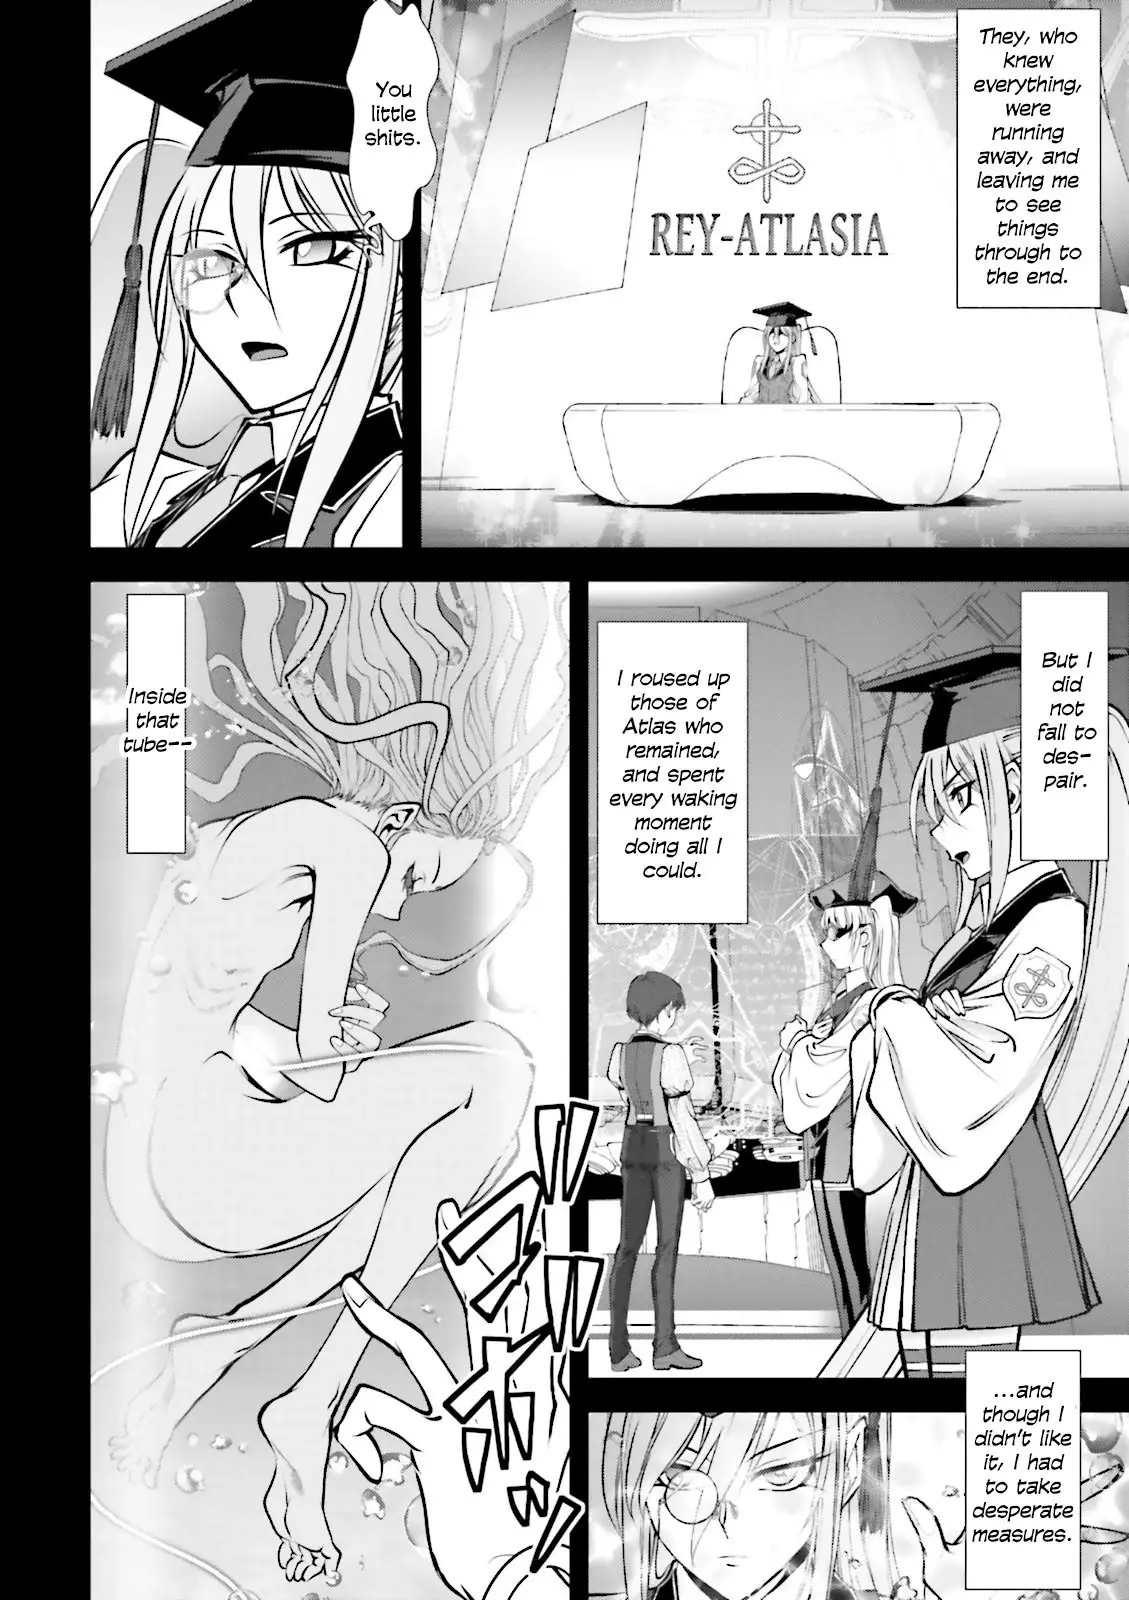 Melty Blood - Back Alley Alliance Nightmare - 9 page 36